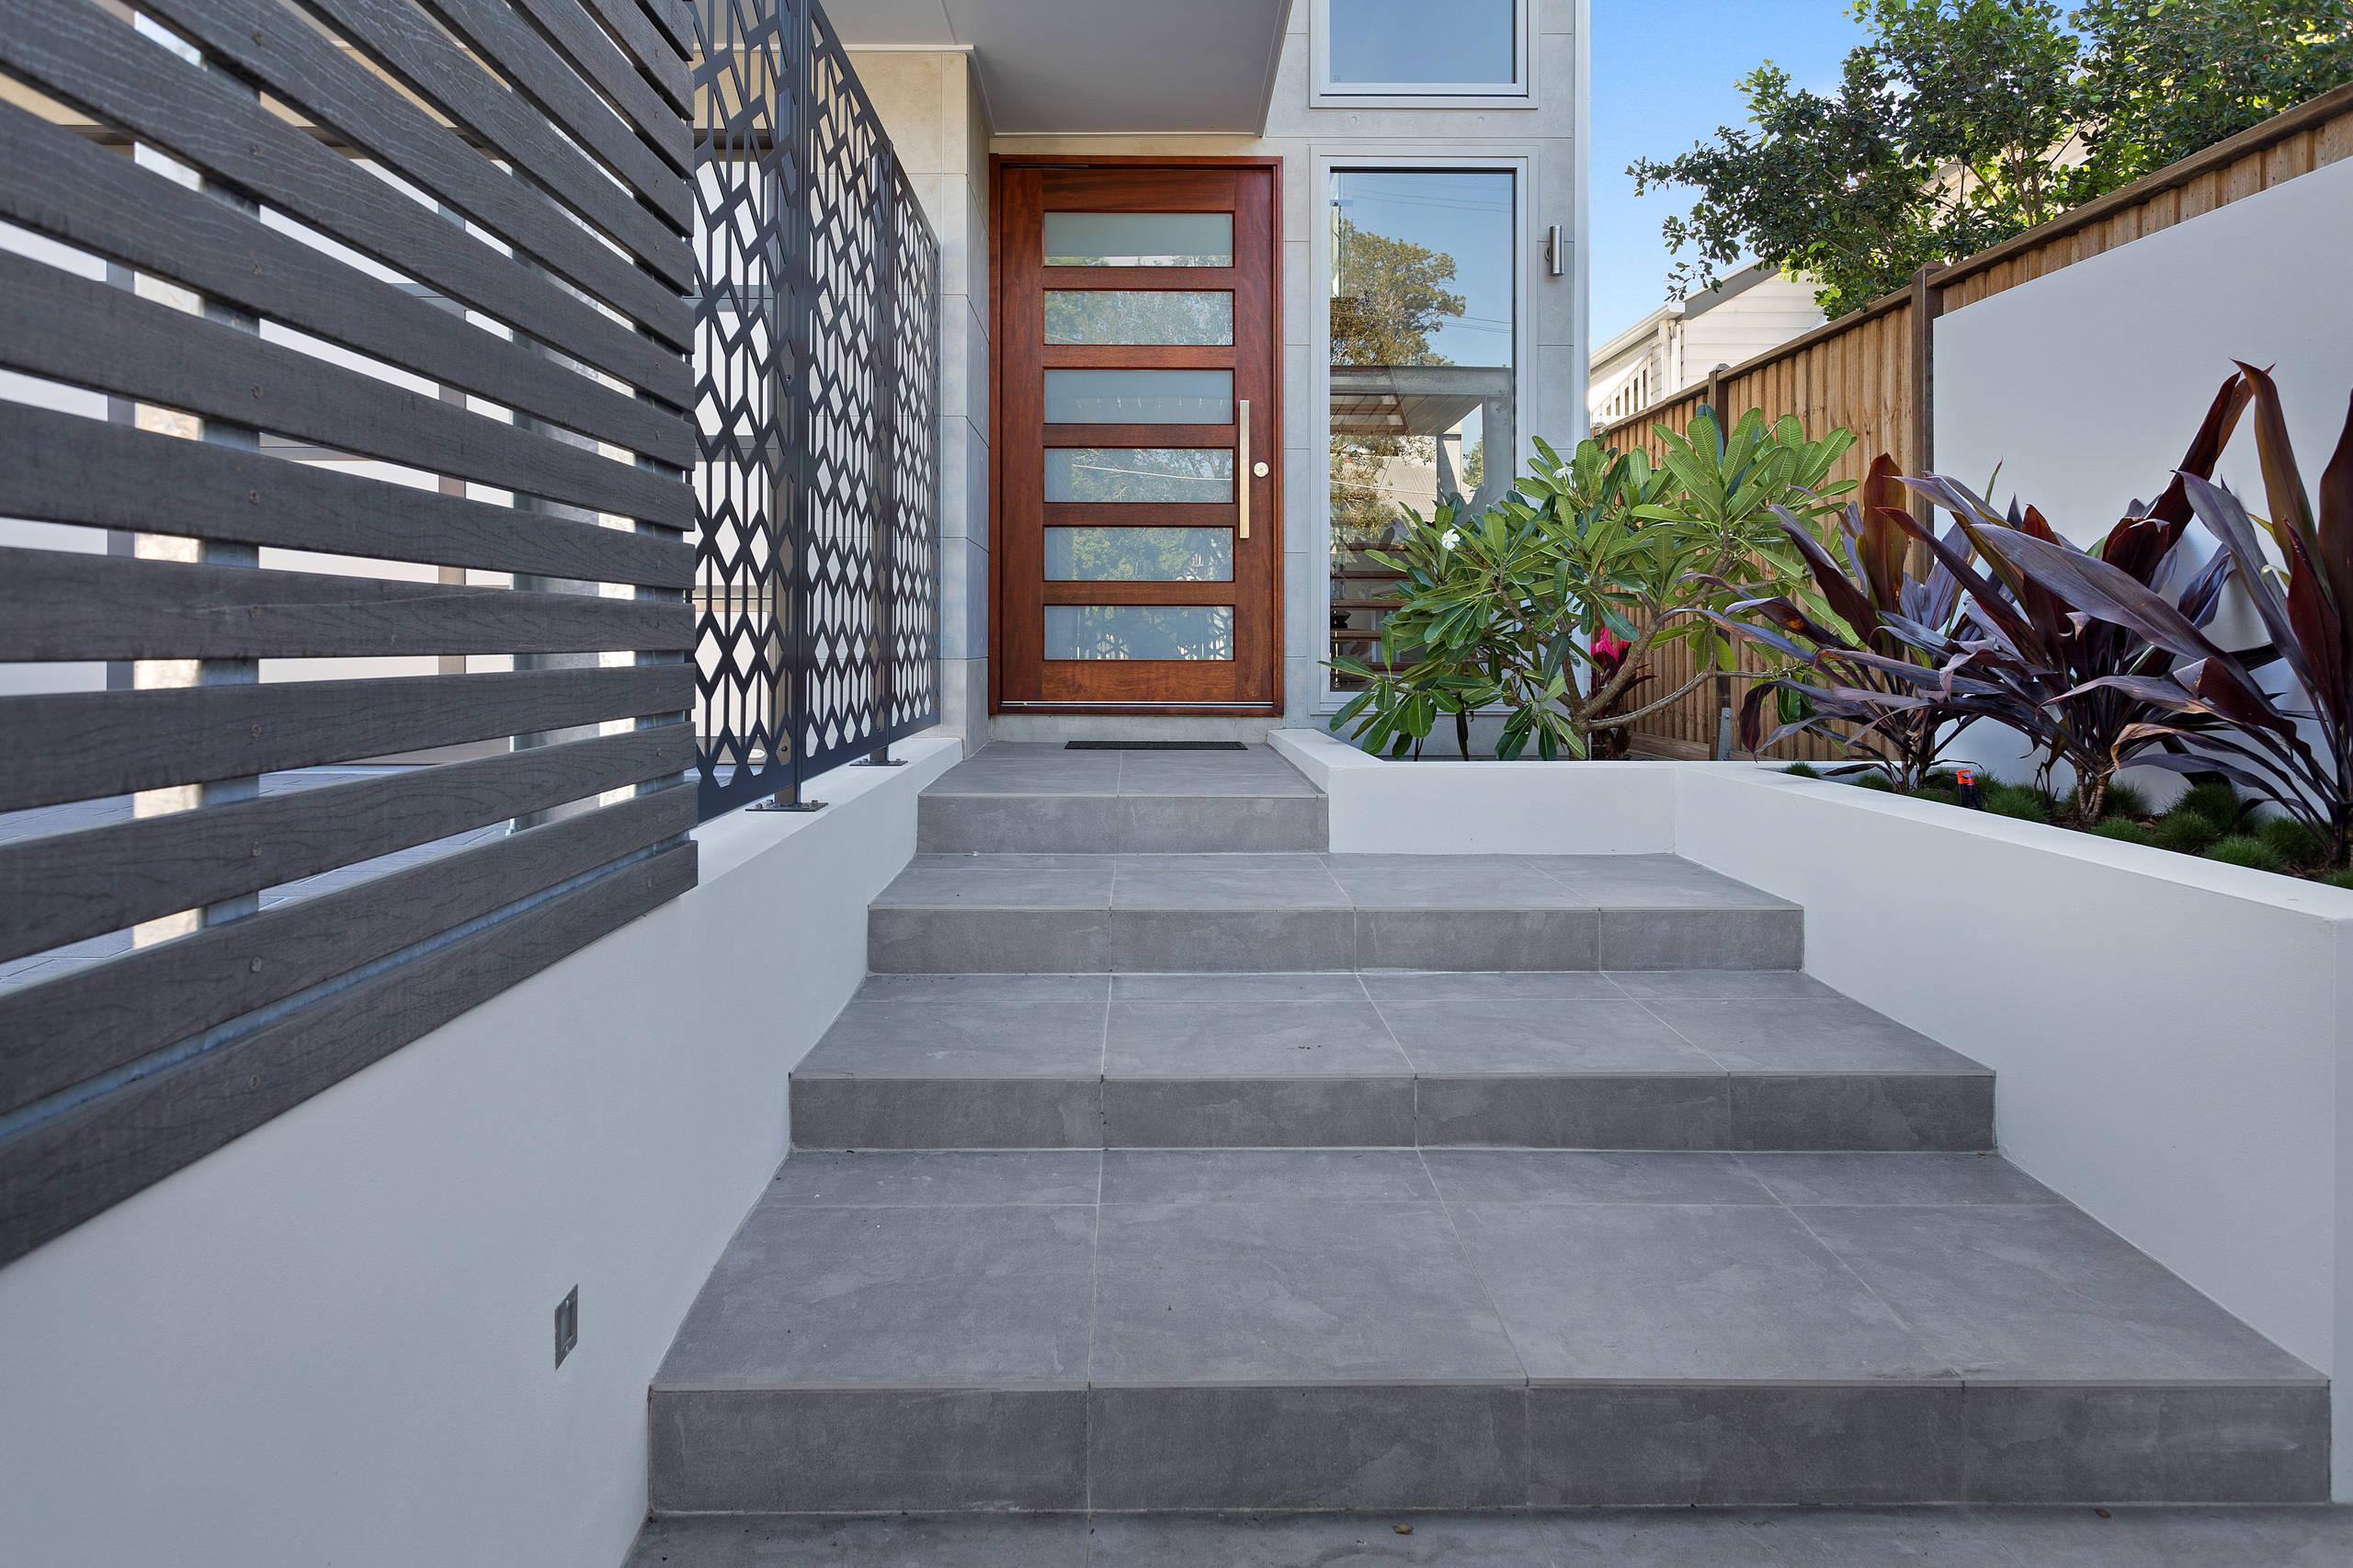 Outside Tile Flooring - Ideas for Patio Flooring and Steps